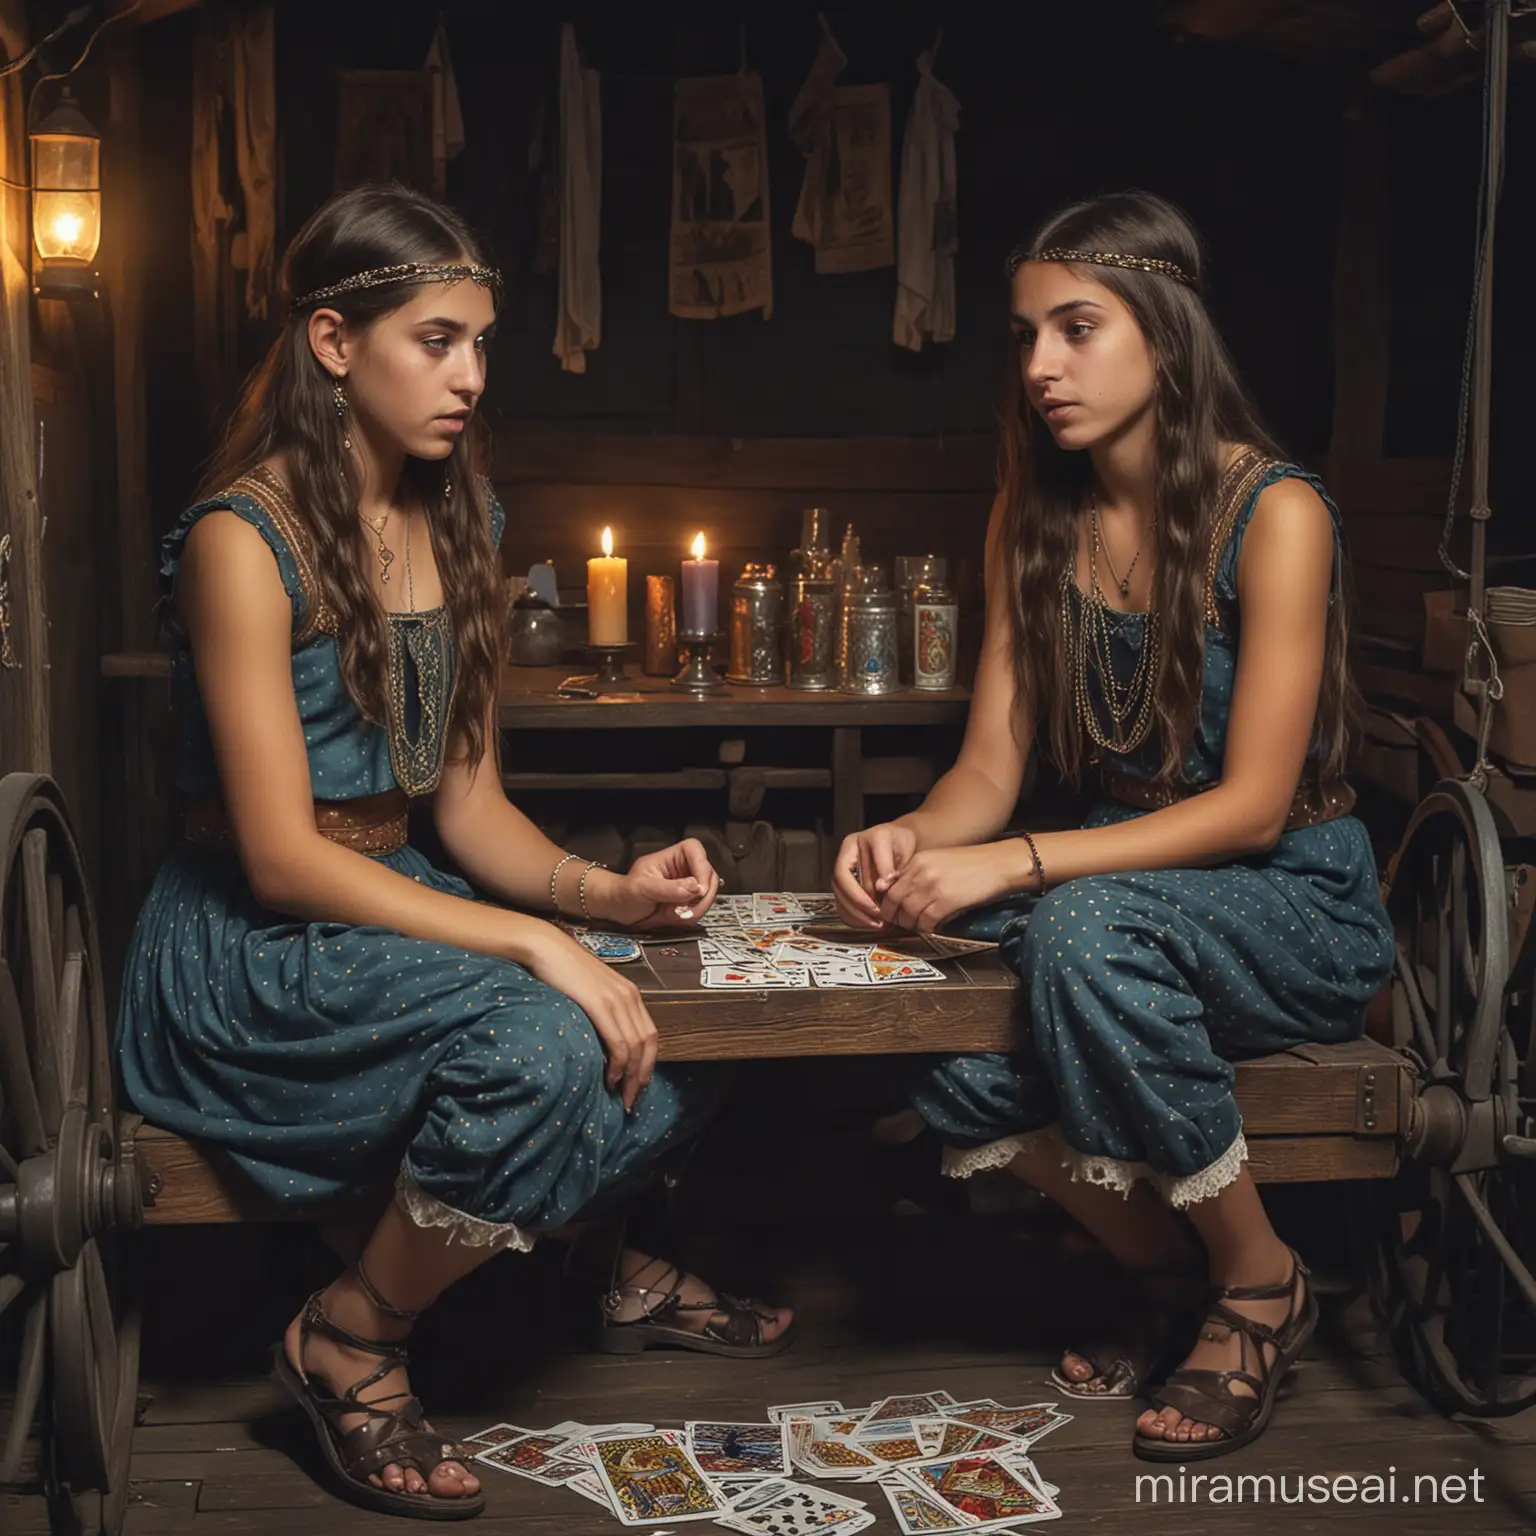 Two gypsy young middledchool girls arround 11 years, one in traditional rich dress and one in used worn-out sports leggings and cropped top, sitting at a table inside a wagon, playing tarot cards, mysterious ambience at night, high quality image, very detailled